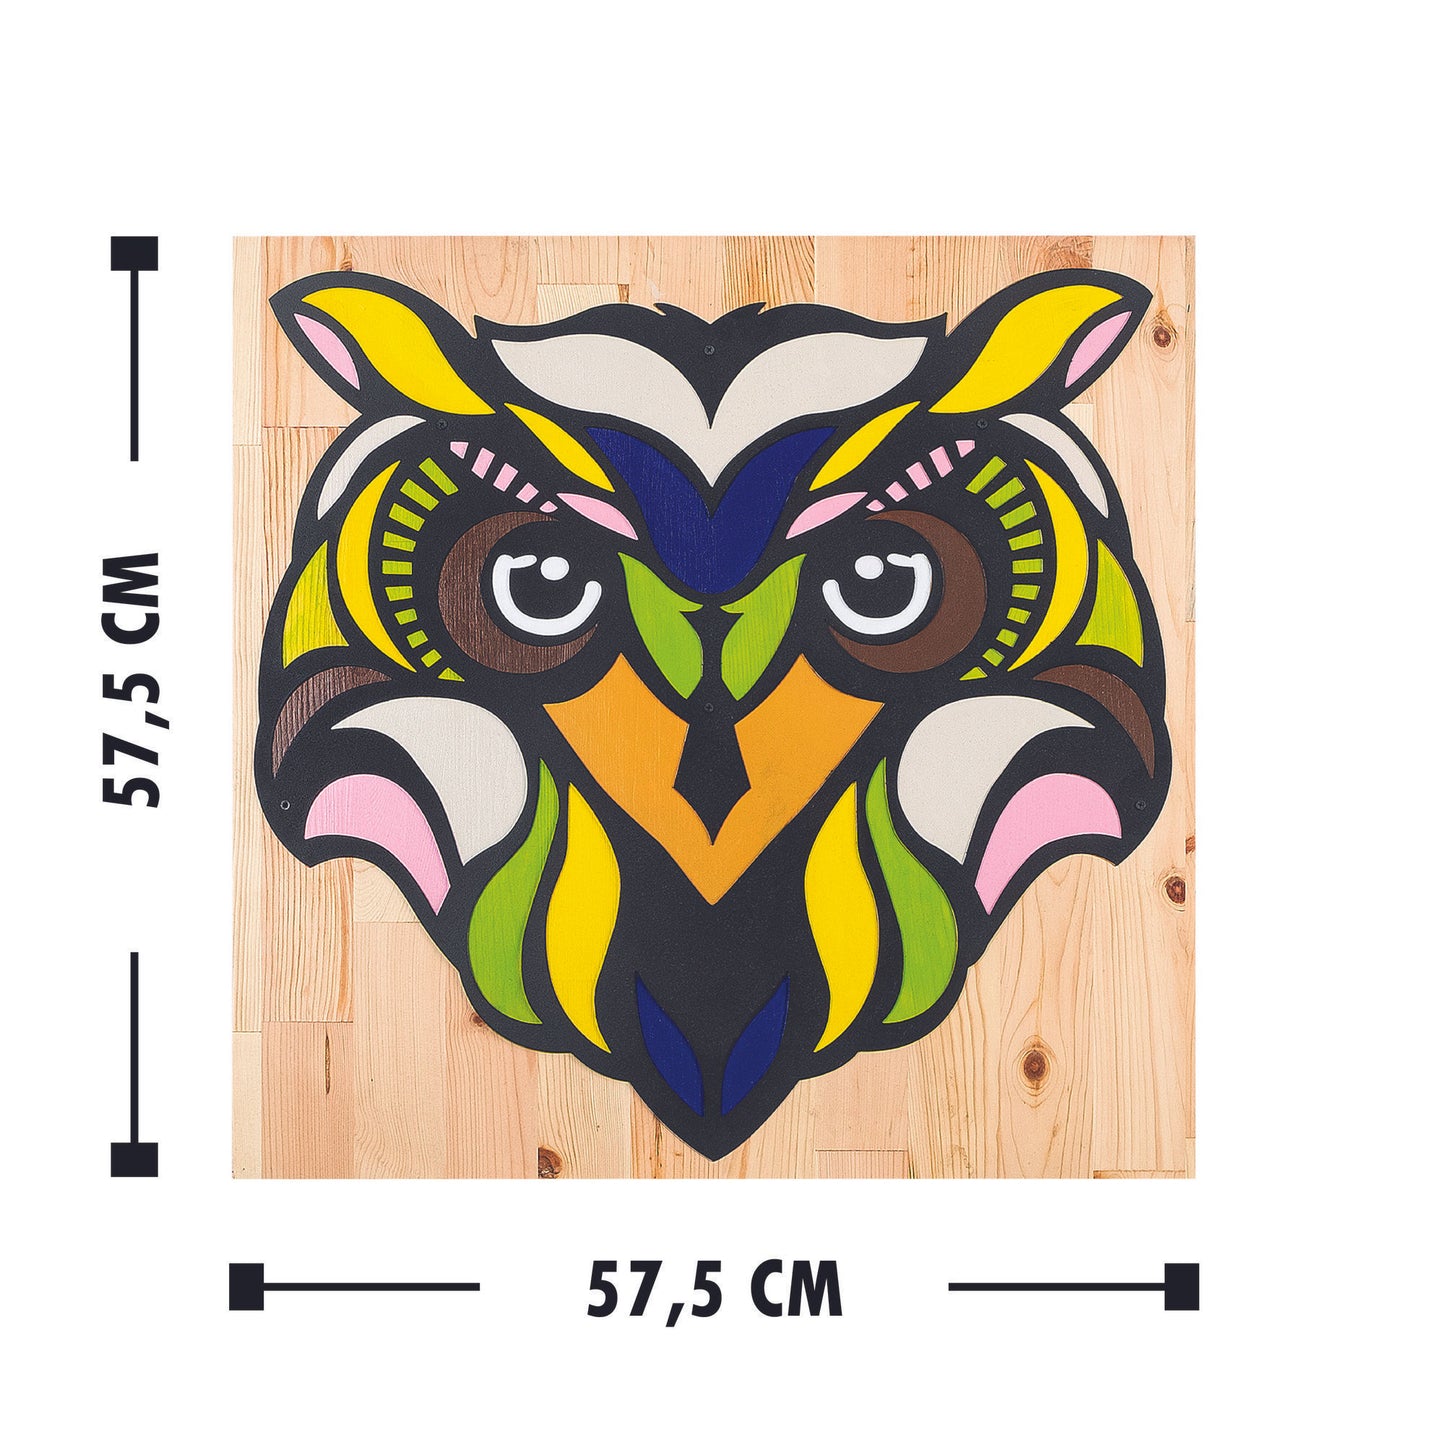 Owl - Decorative Wooden Wall Accessory